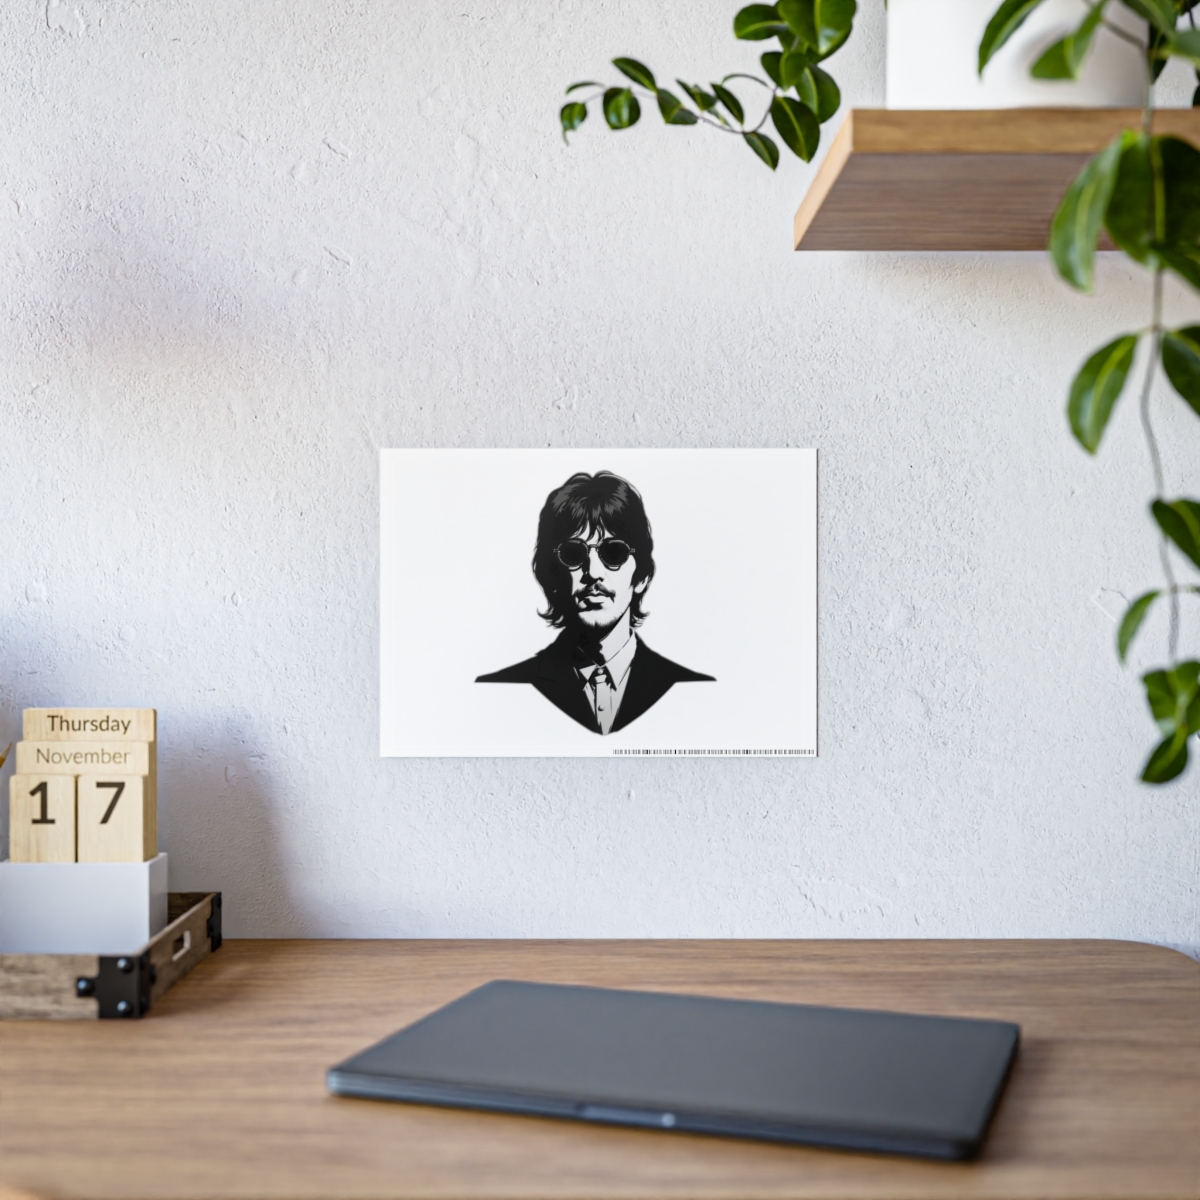 Primary image for Ringo Starr High Gloss Poster: Timeless Beatle Portrait for Music Lovers